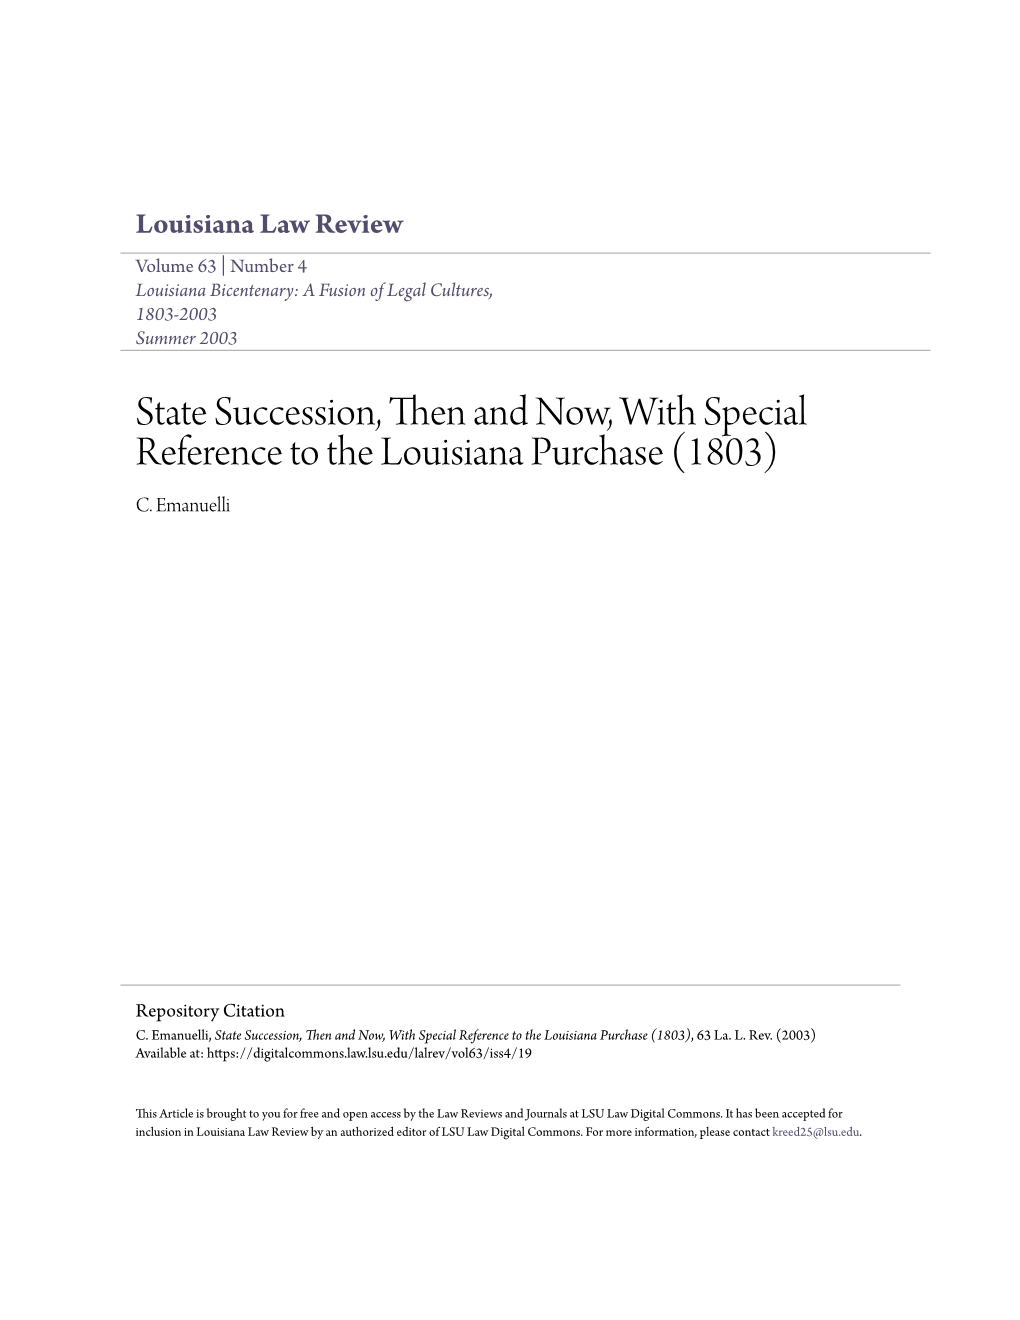 State Succession, Then and Now, with Special Reference to the Louisiana Purchase (1803) C